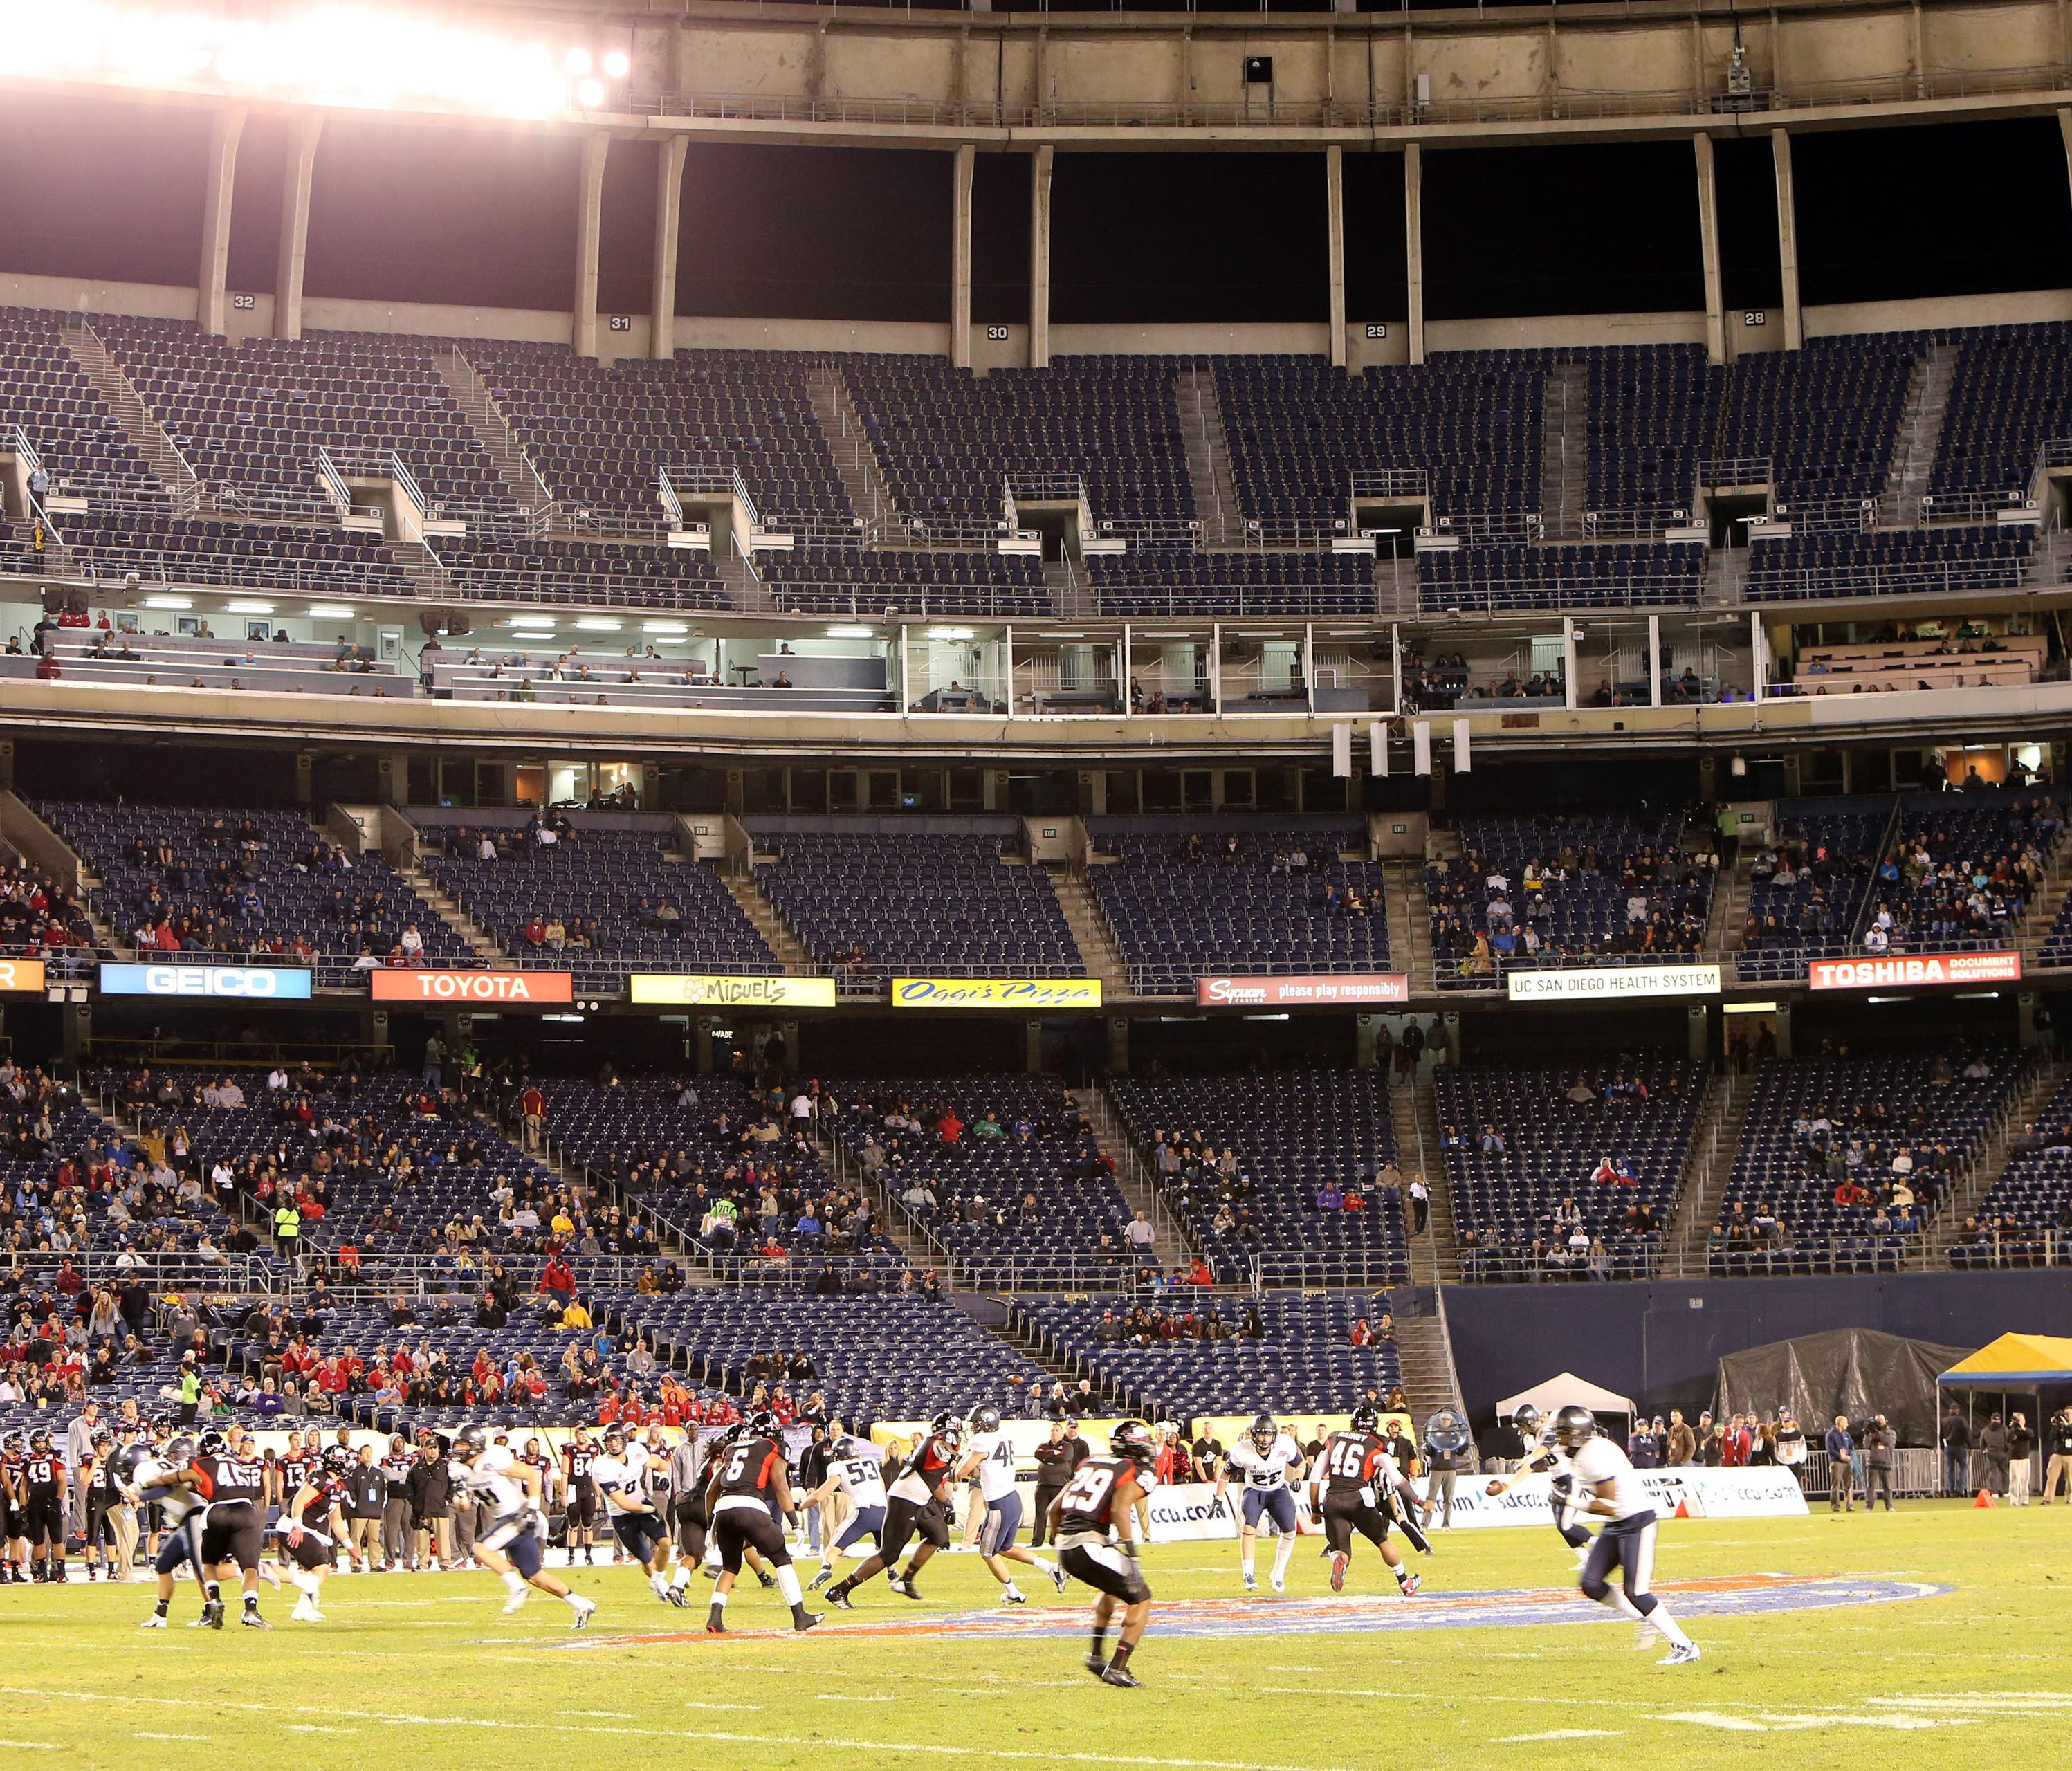 The Poinsettia Bowl in San Diego, shown in 2013 when attendance as less than 24,000, ceased operation after last year's game.